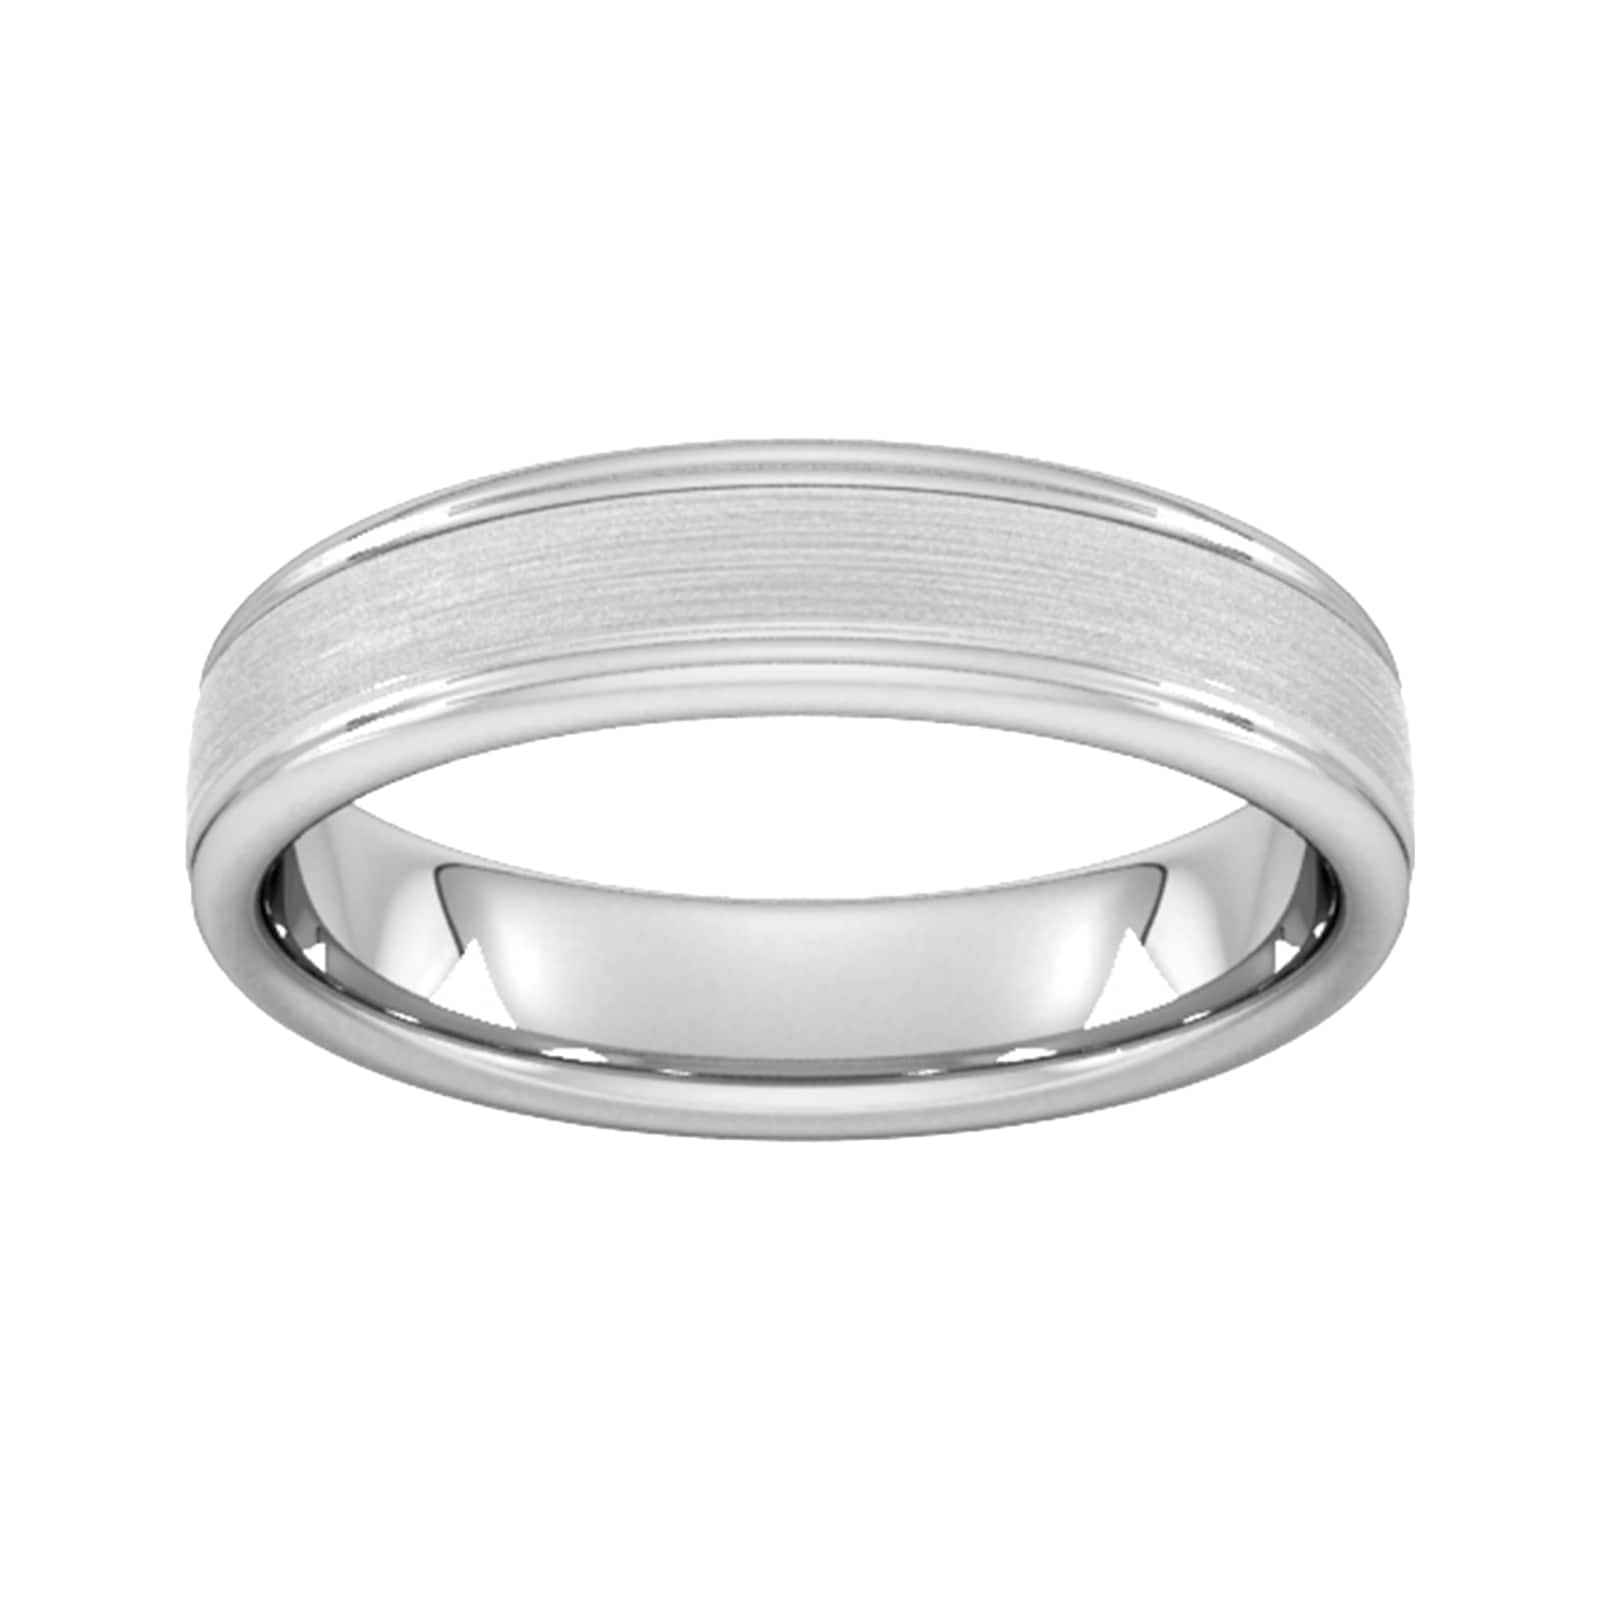 5mm Traditional Court Standard Matt Centre With Grooves Wedding Ring In 950 Palladium - Ring Size Z